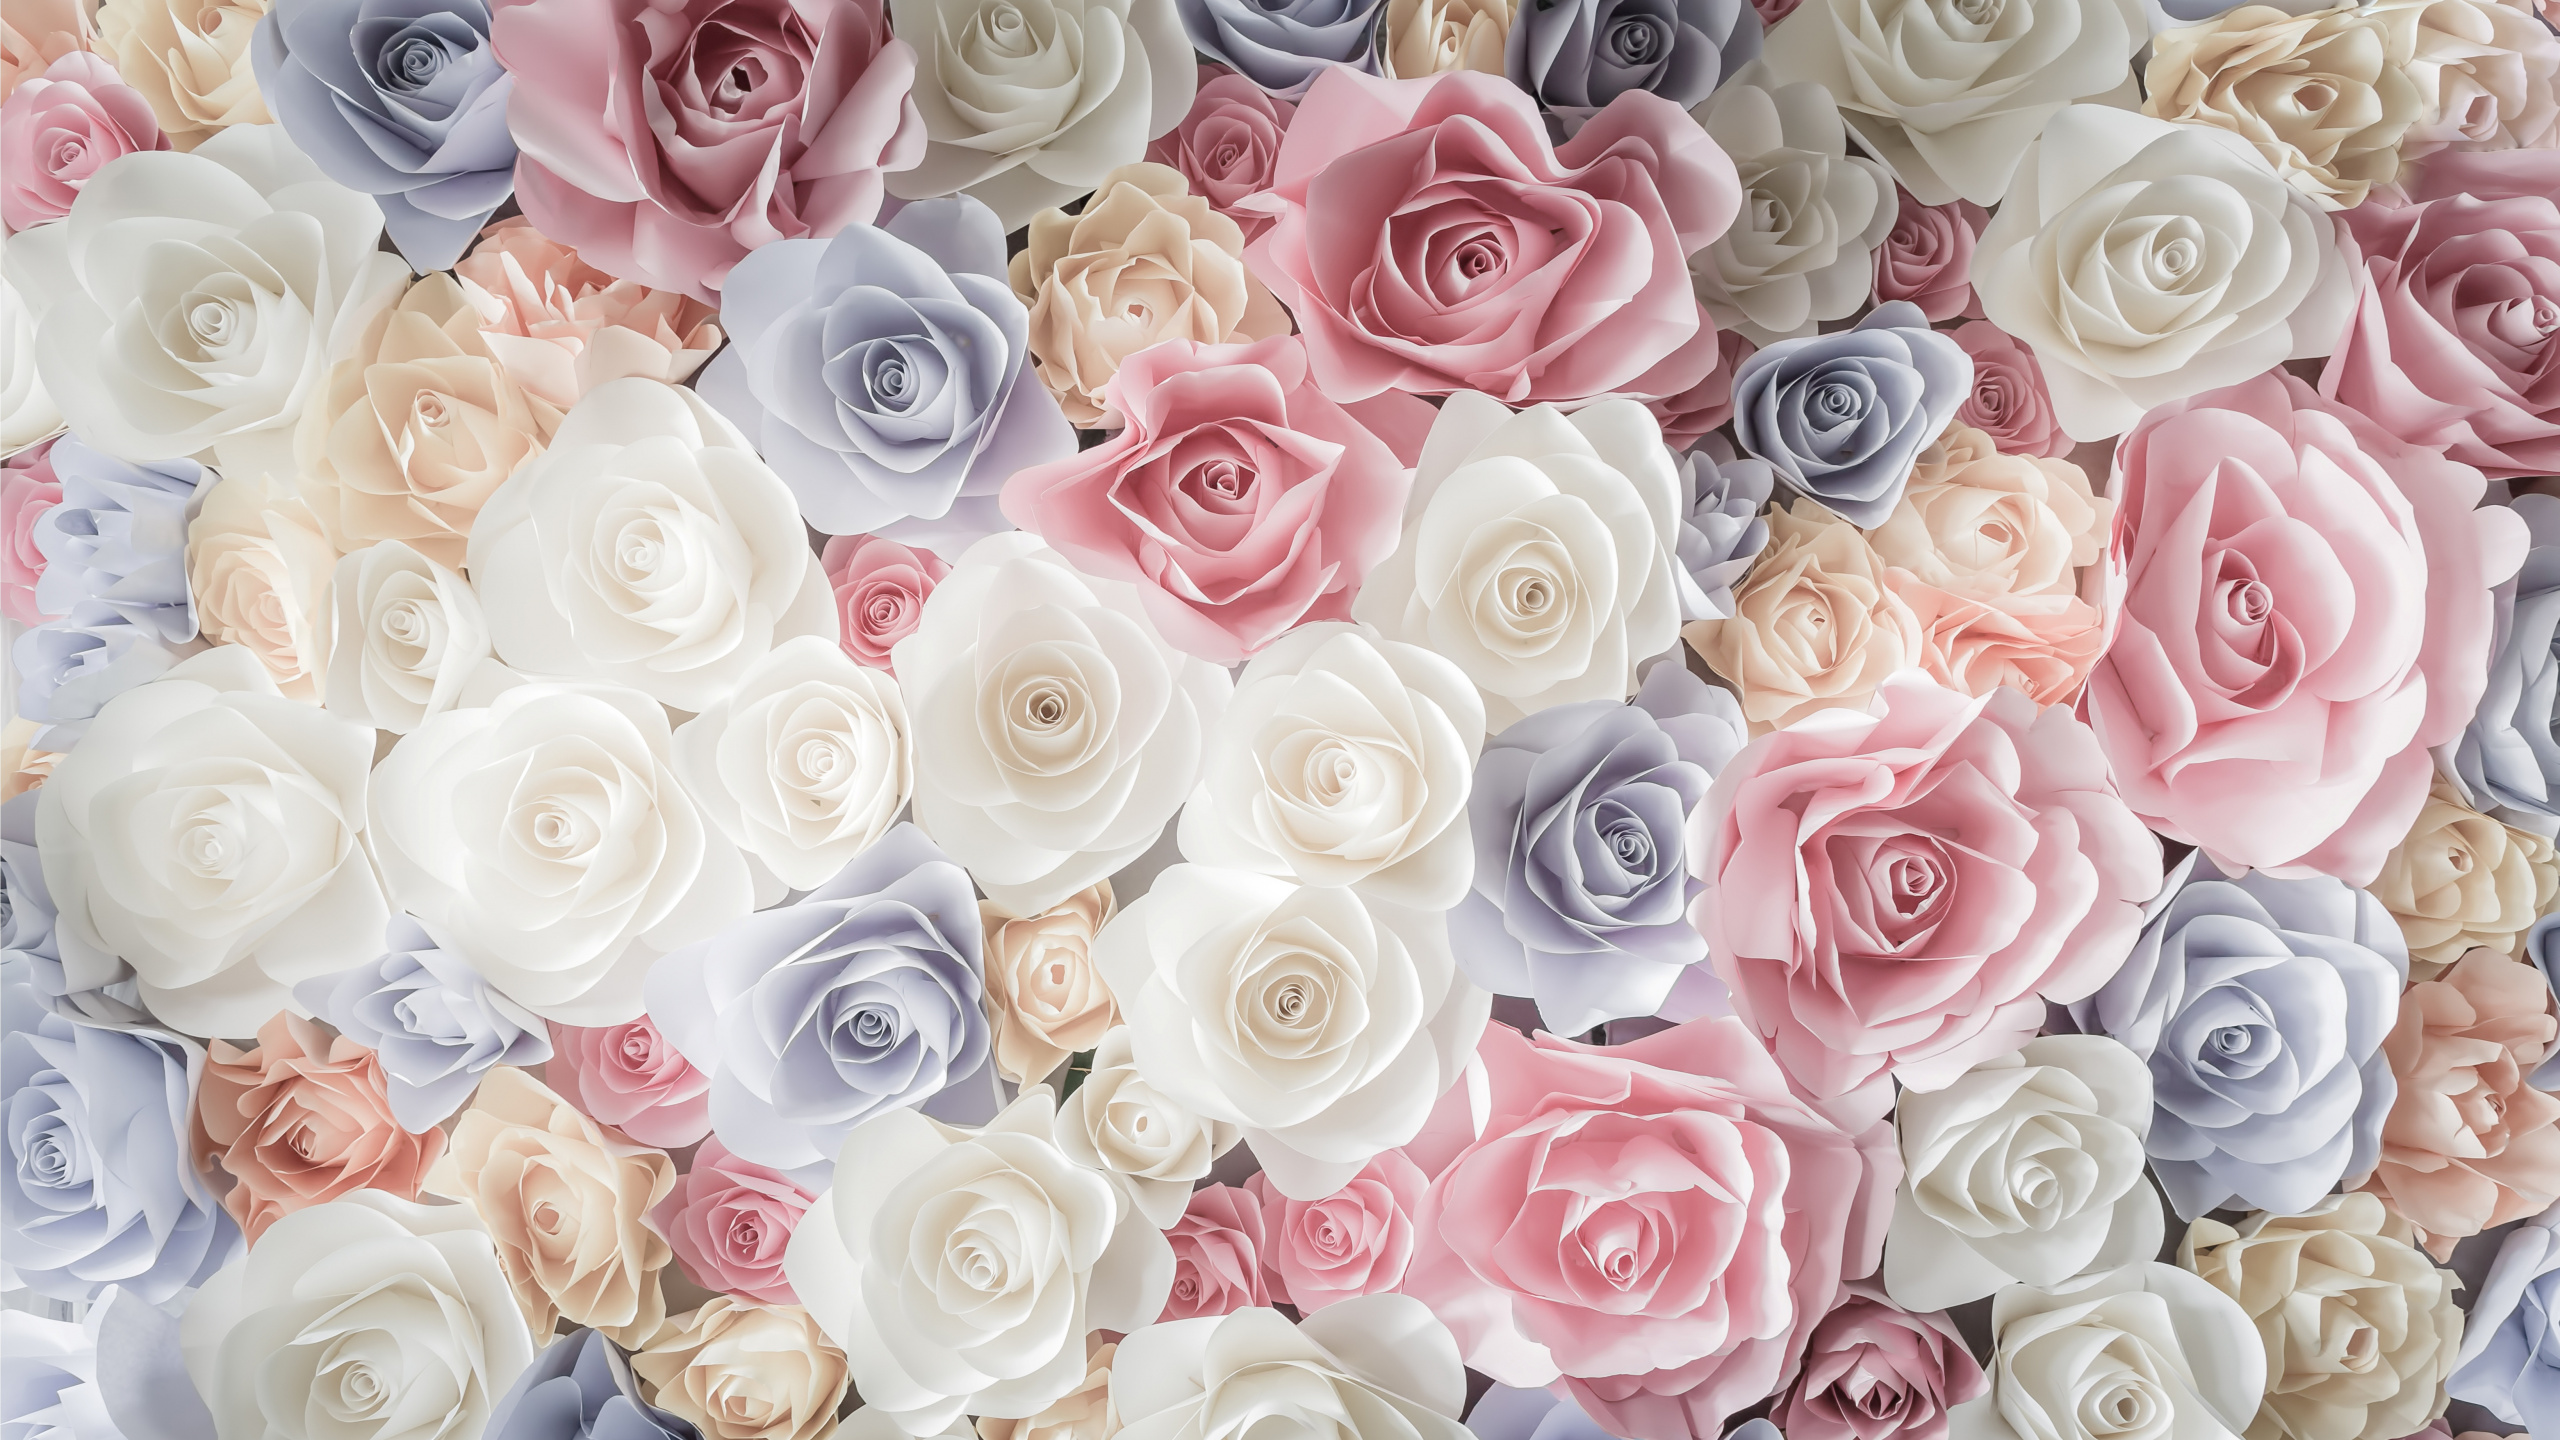 White Pink and Blue Rose Bouquet. Wallpaper in 2560x1440 Resolution